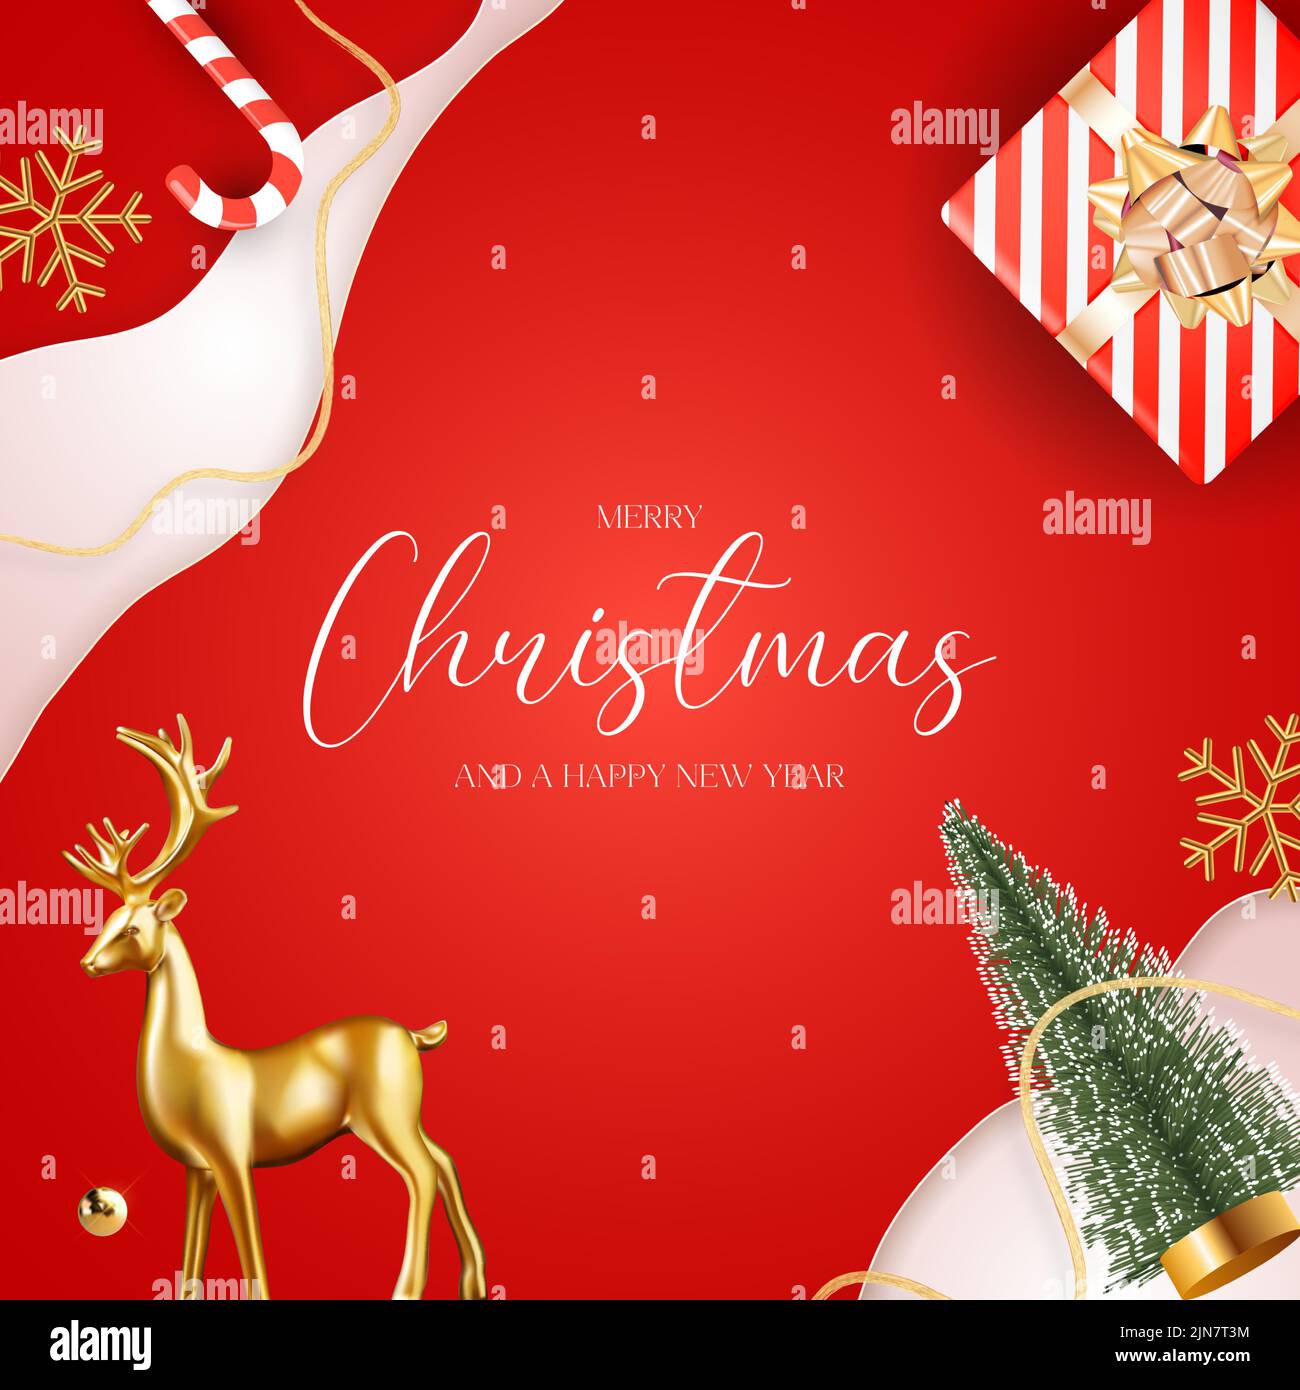 Merry Christmas and Happy New Year Greeting Card. EPS10 Stock Vector